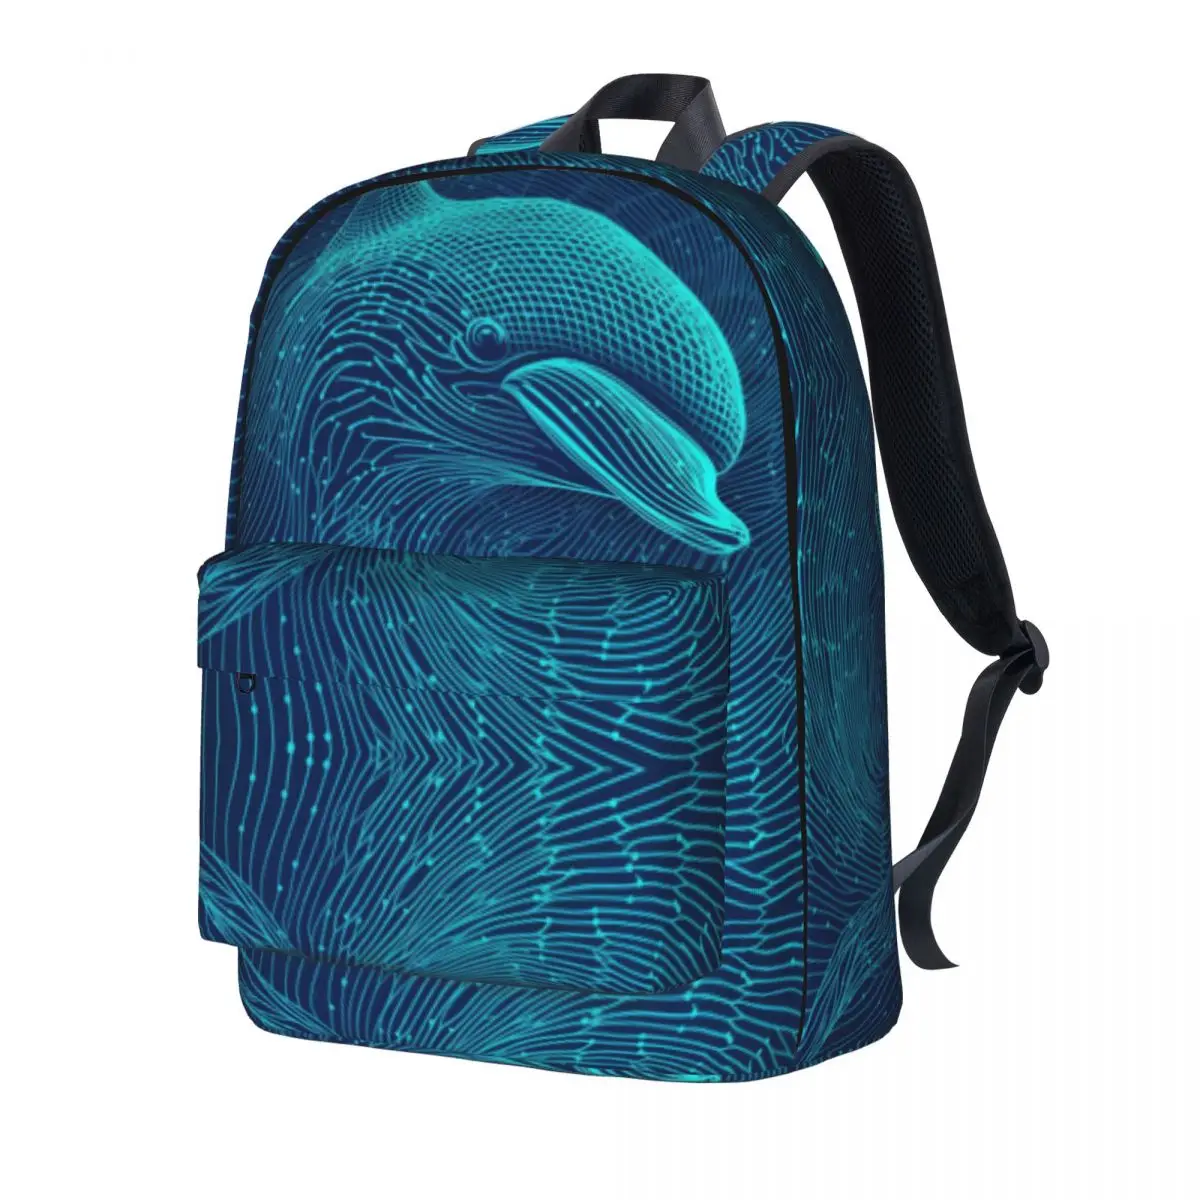 

Dolphin Backpack Psychedelic Lines Portraits Travel Backpacks Boy Fashion School Bags Design Breathable Rucksack